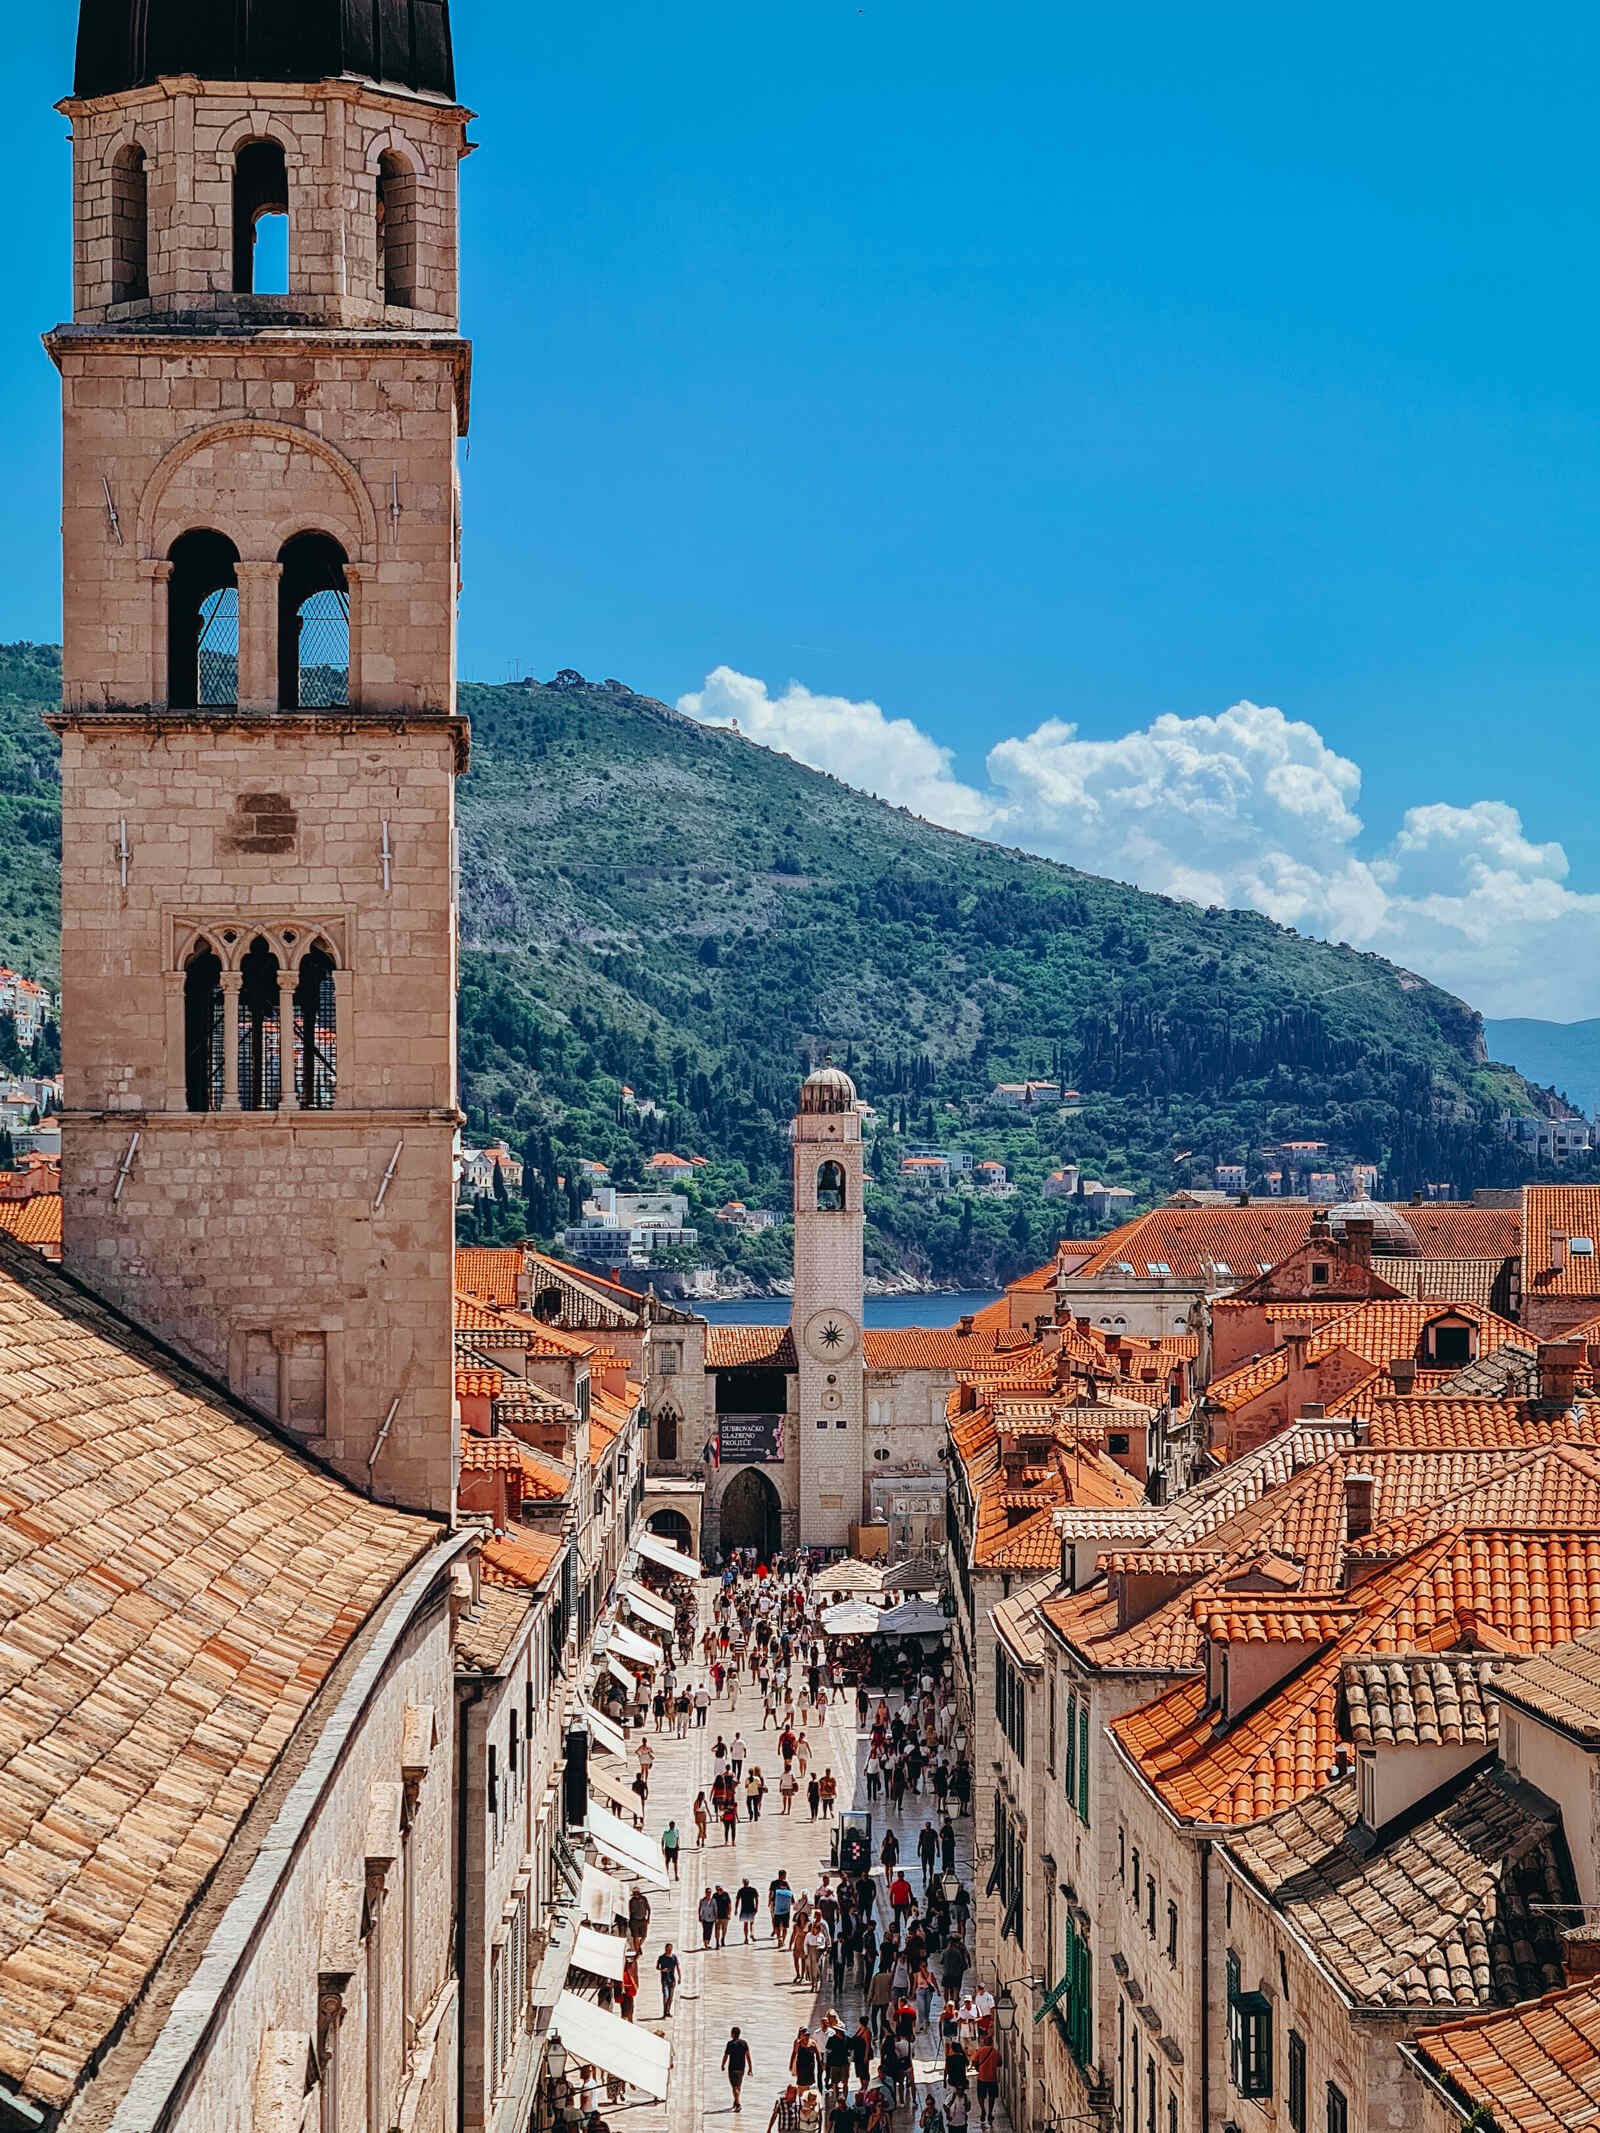 looking down on a busy street in dubrovnik from the city walls